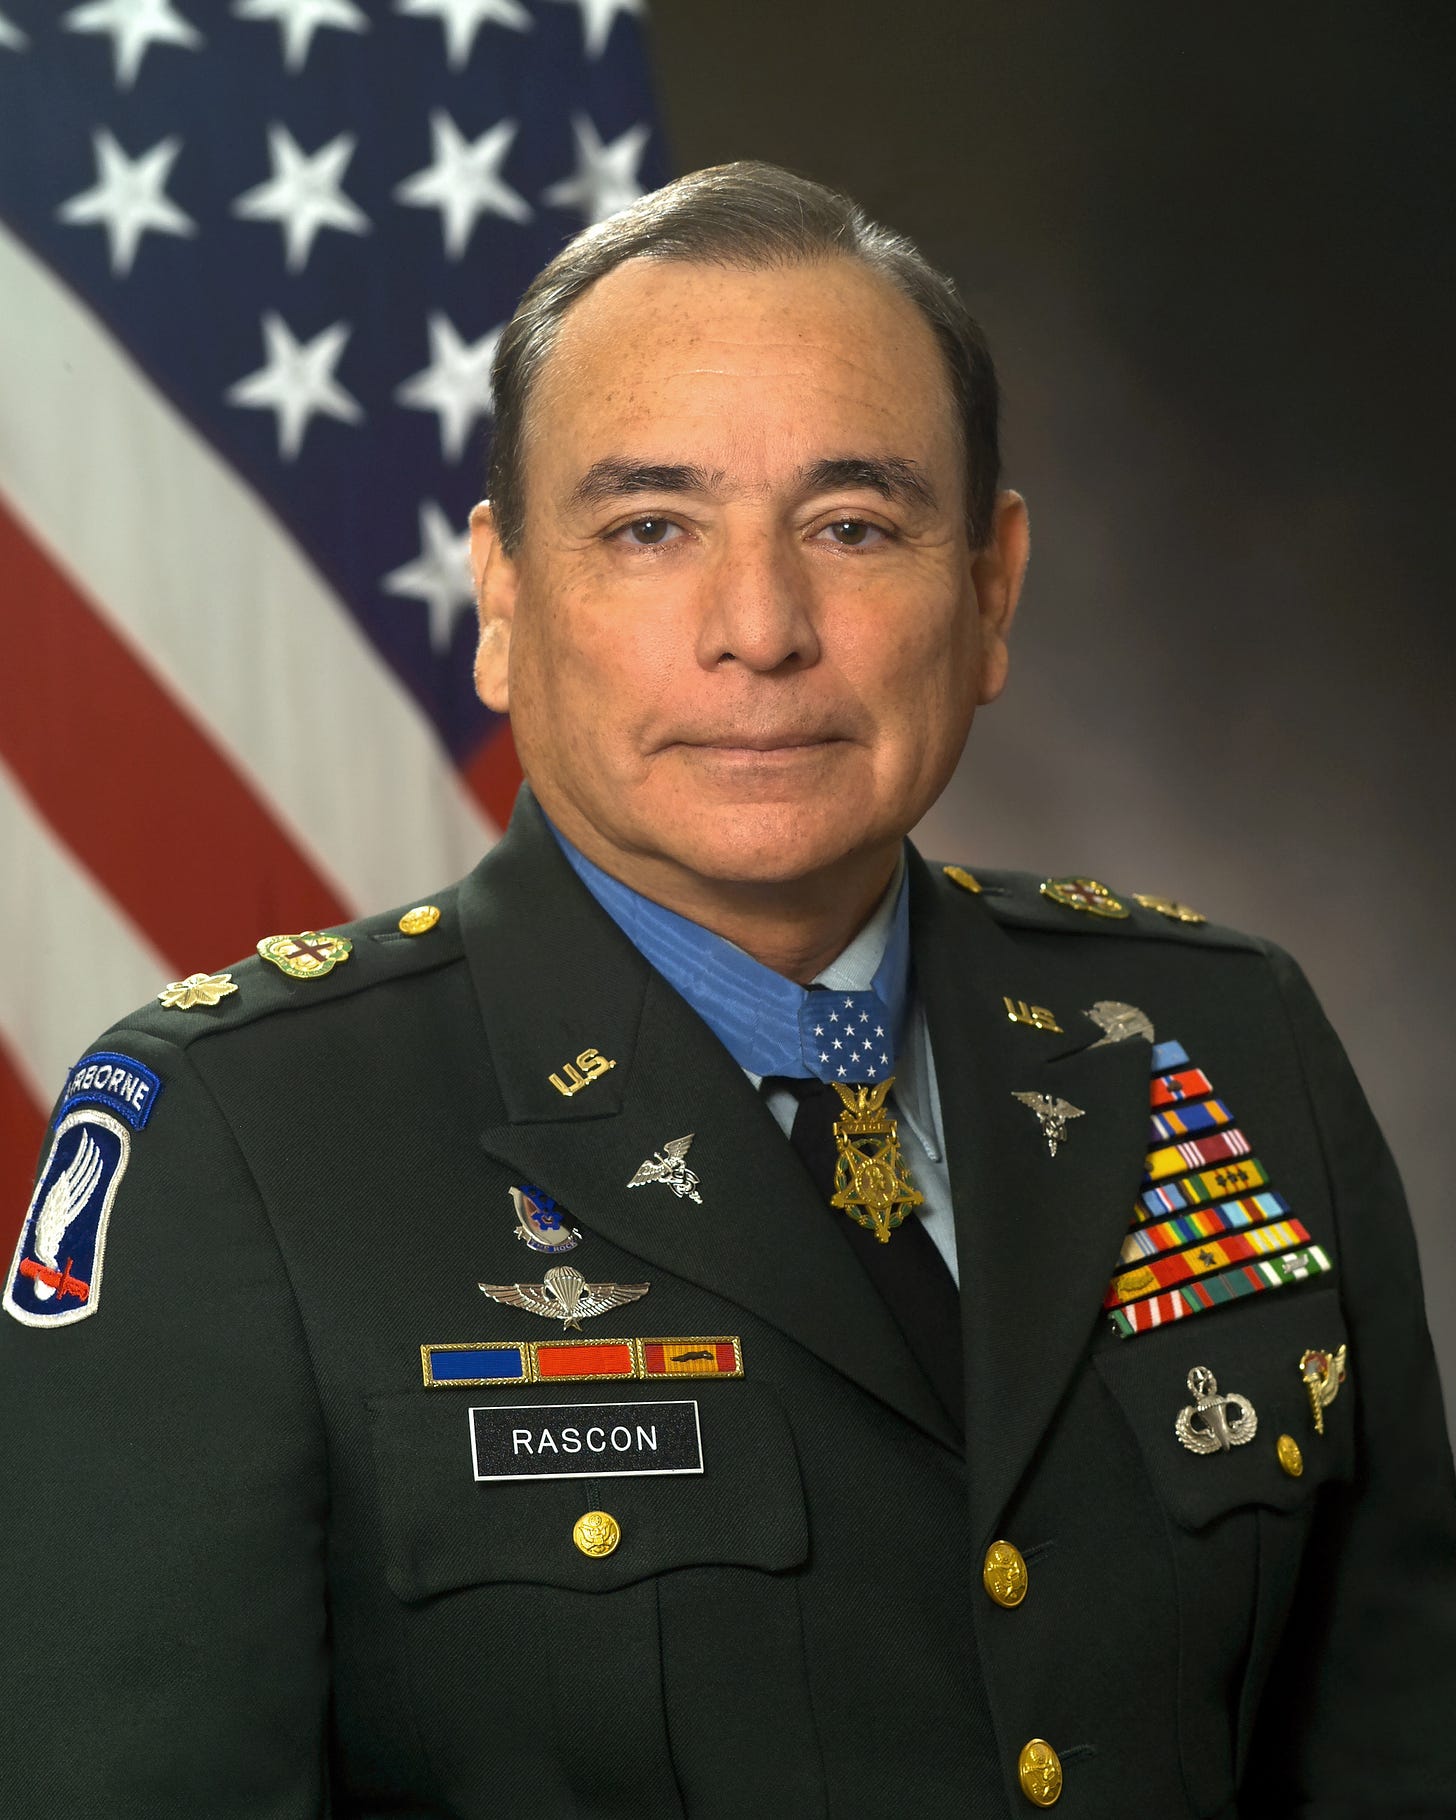 Alfred Rascon, in uniform, wearing his Medal of Honor.  An American flag appears in the background.